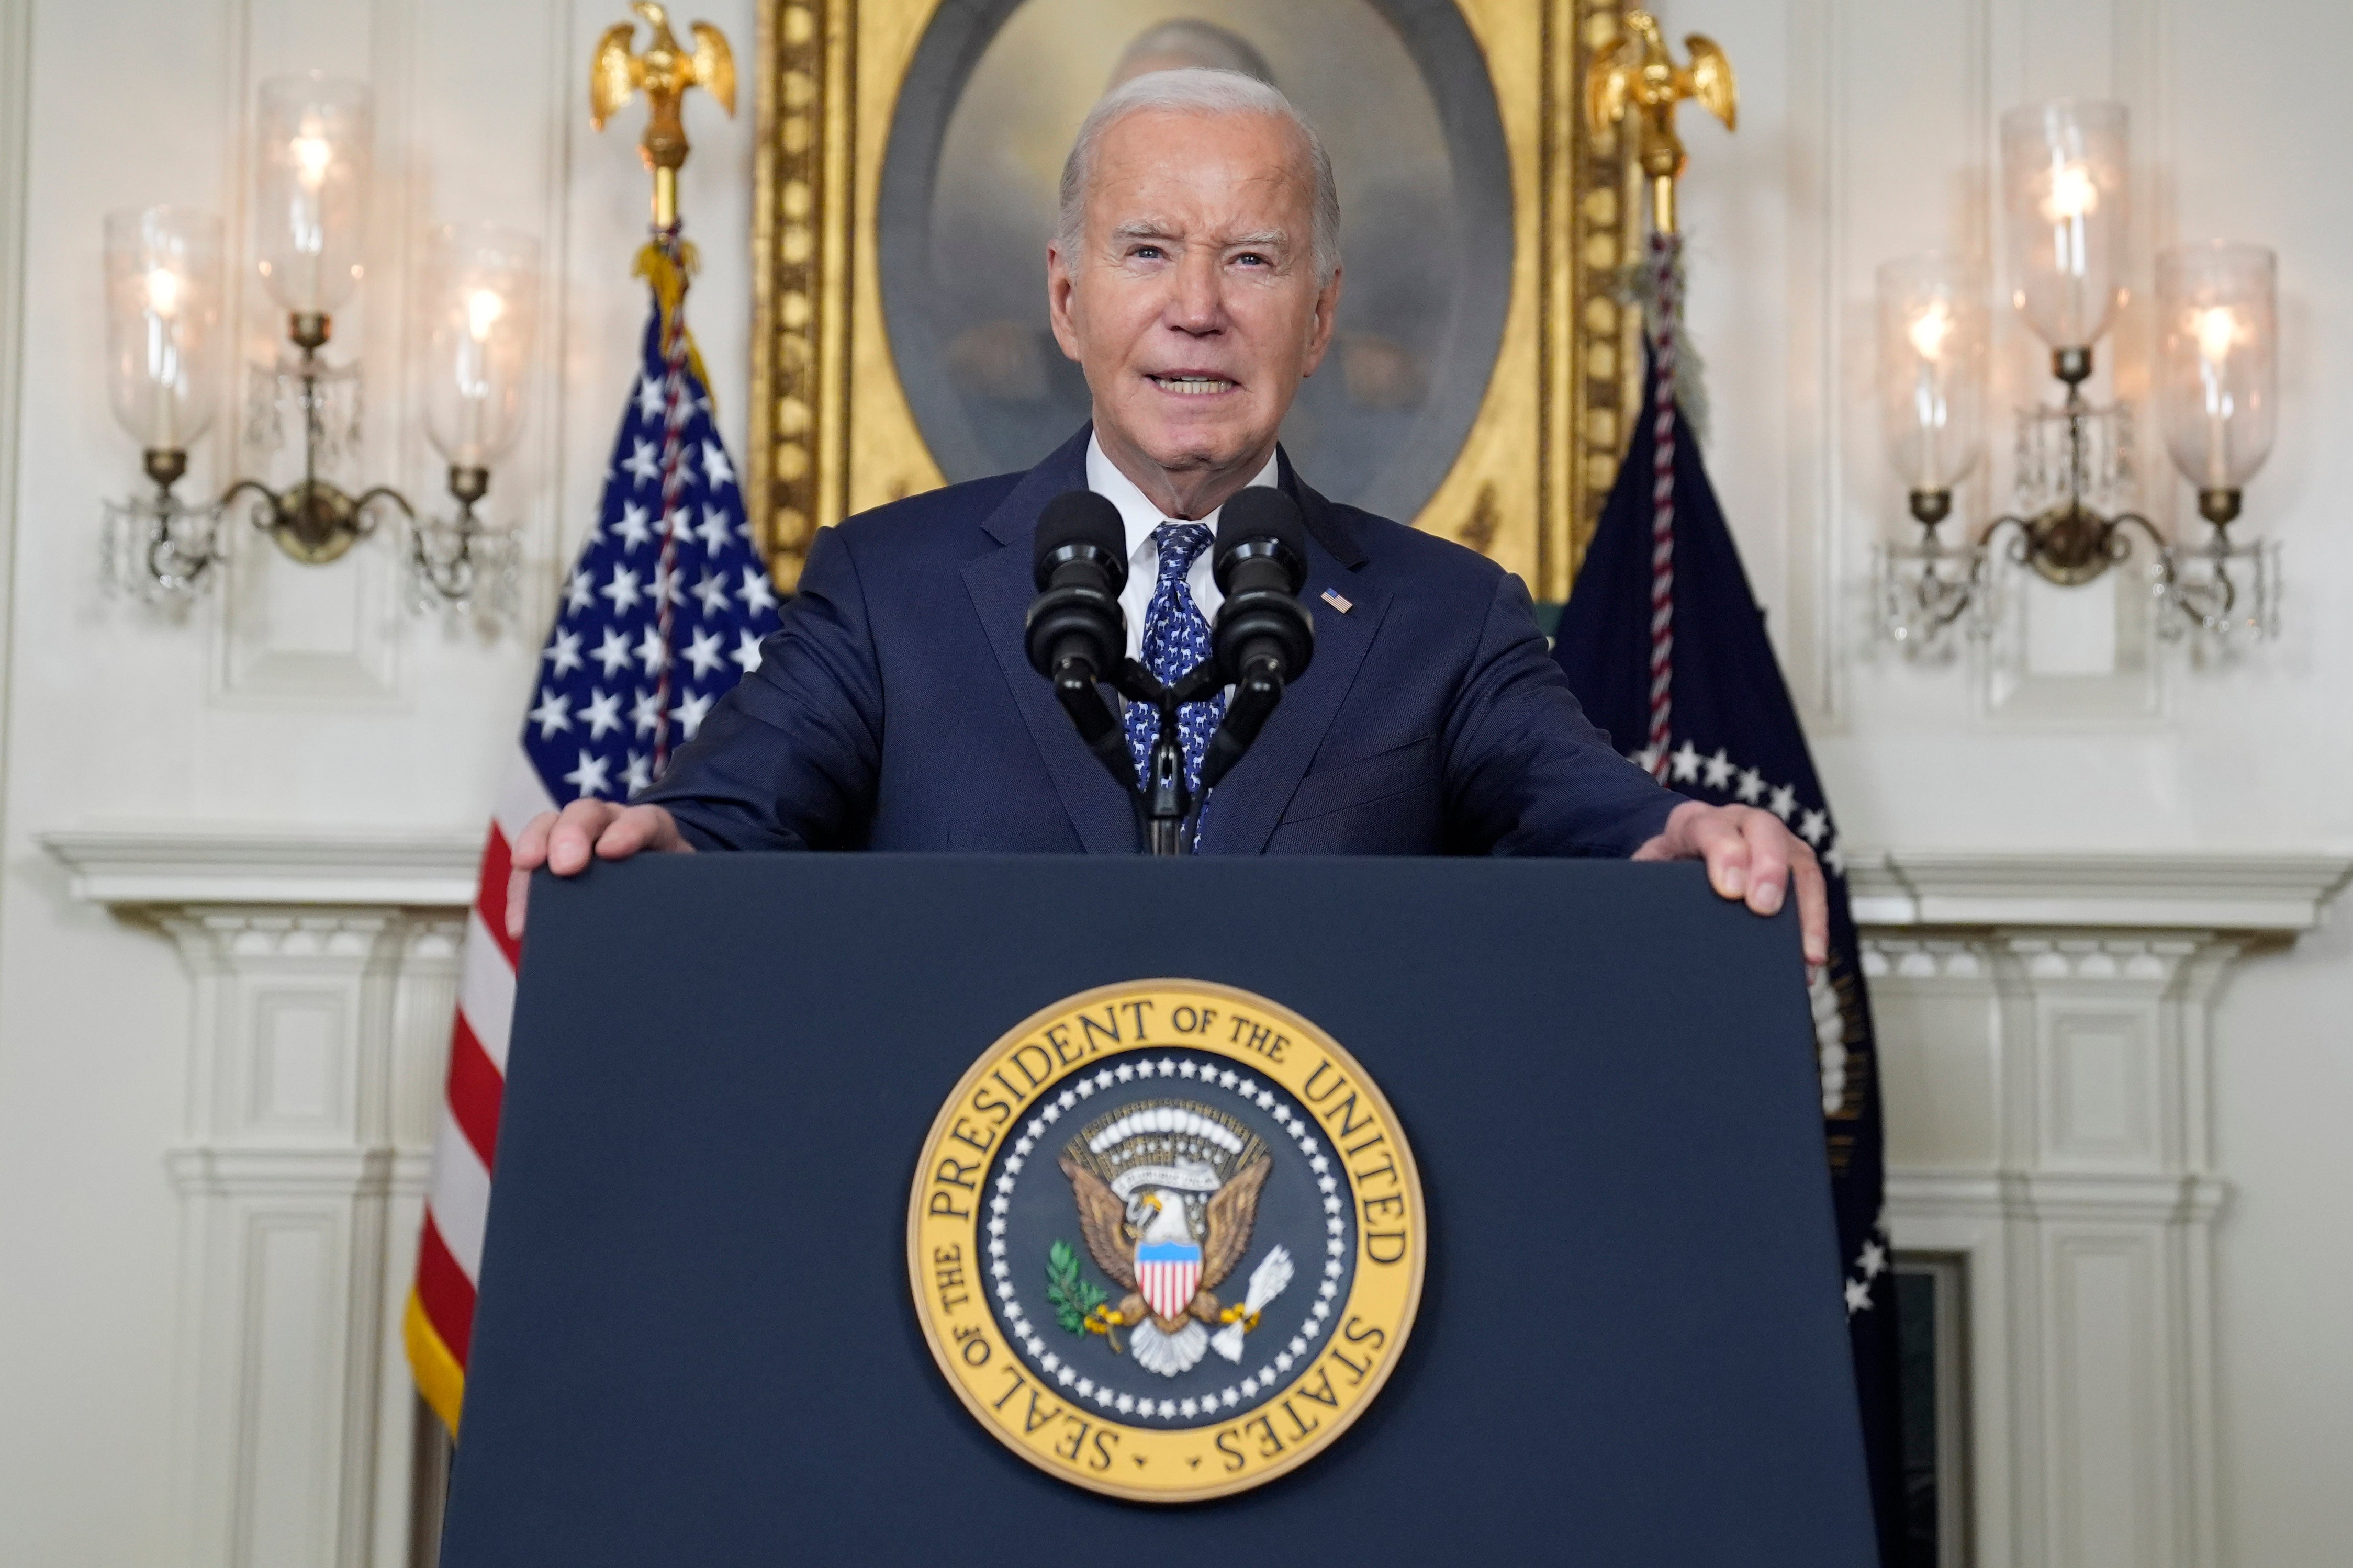 Joe Biden called a press conference to demonstrate his mental acuity – then referred to ‘President al Sisi of Mexico’